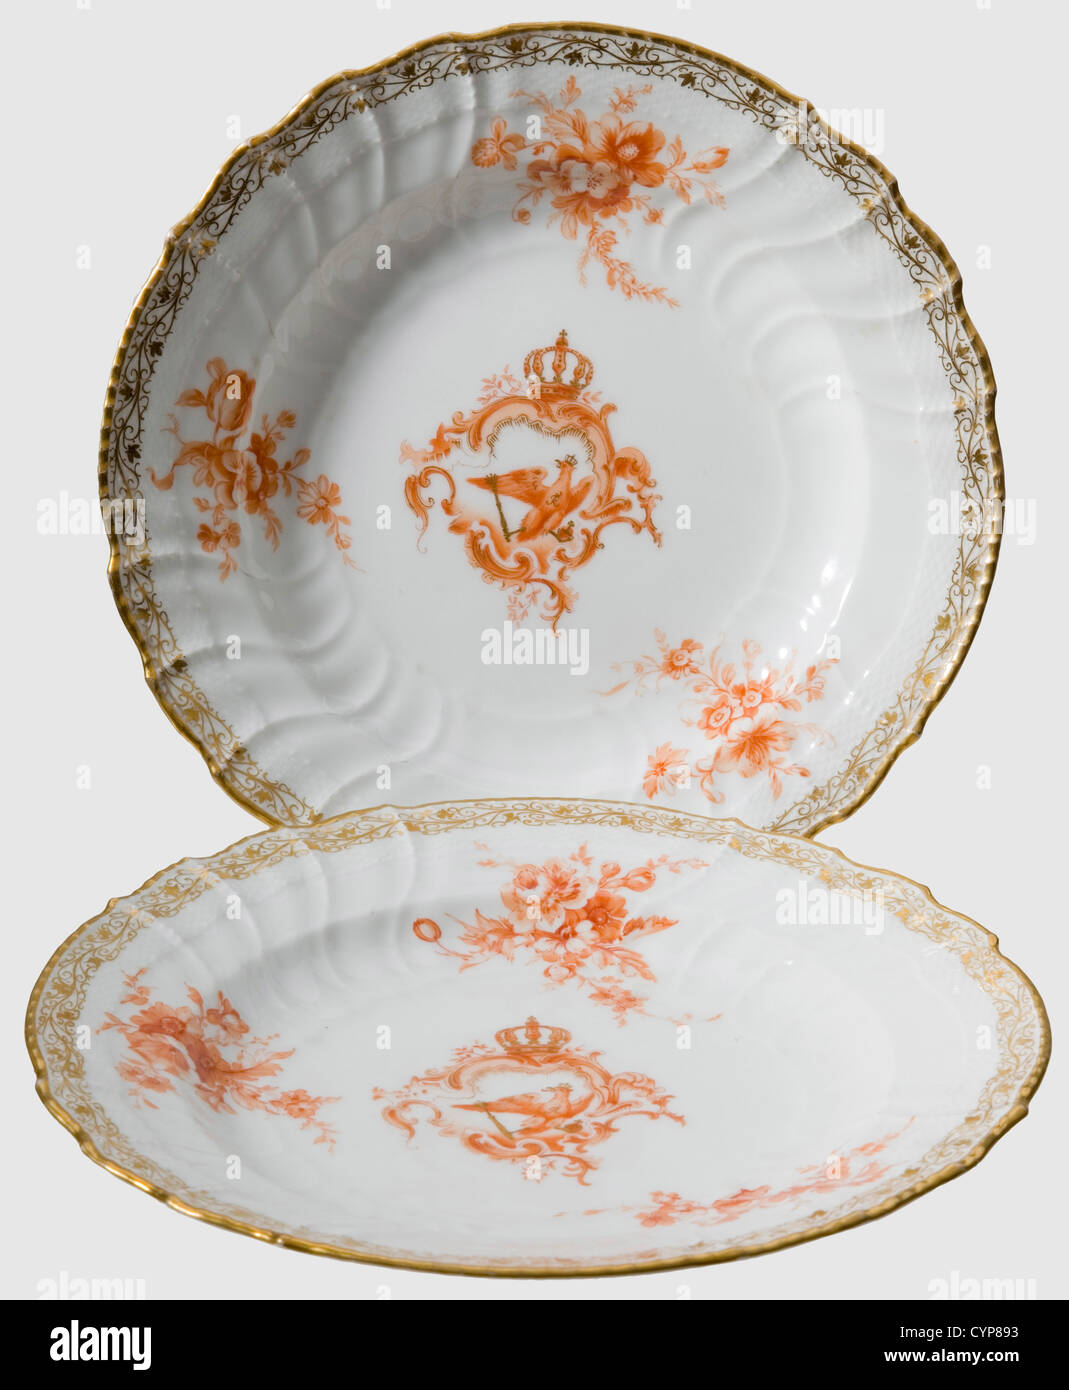 Kaiser Wilhelm II - two Neuosier KPM plates,from the royal table service.  White,glazed porcelain with colcothar decoration and a golden vine leaves  border. In the centre the Prussian eagle with the gilt